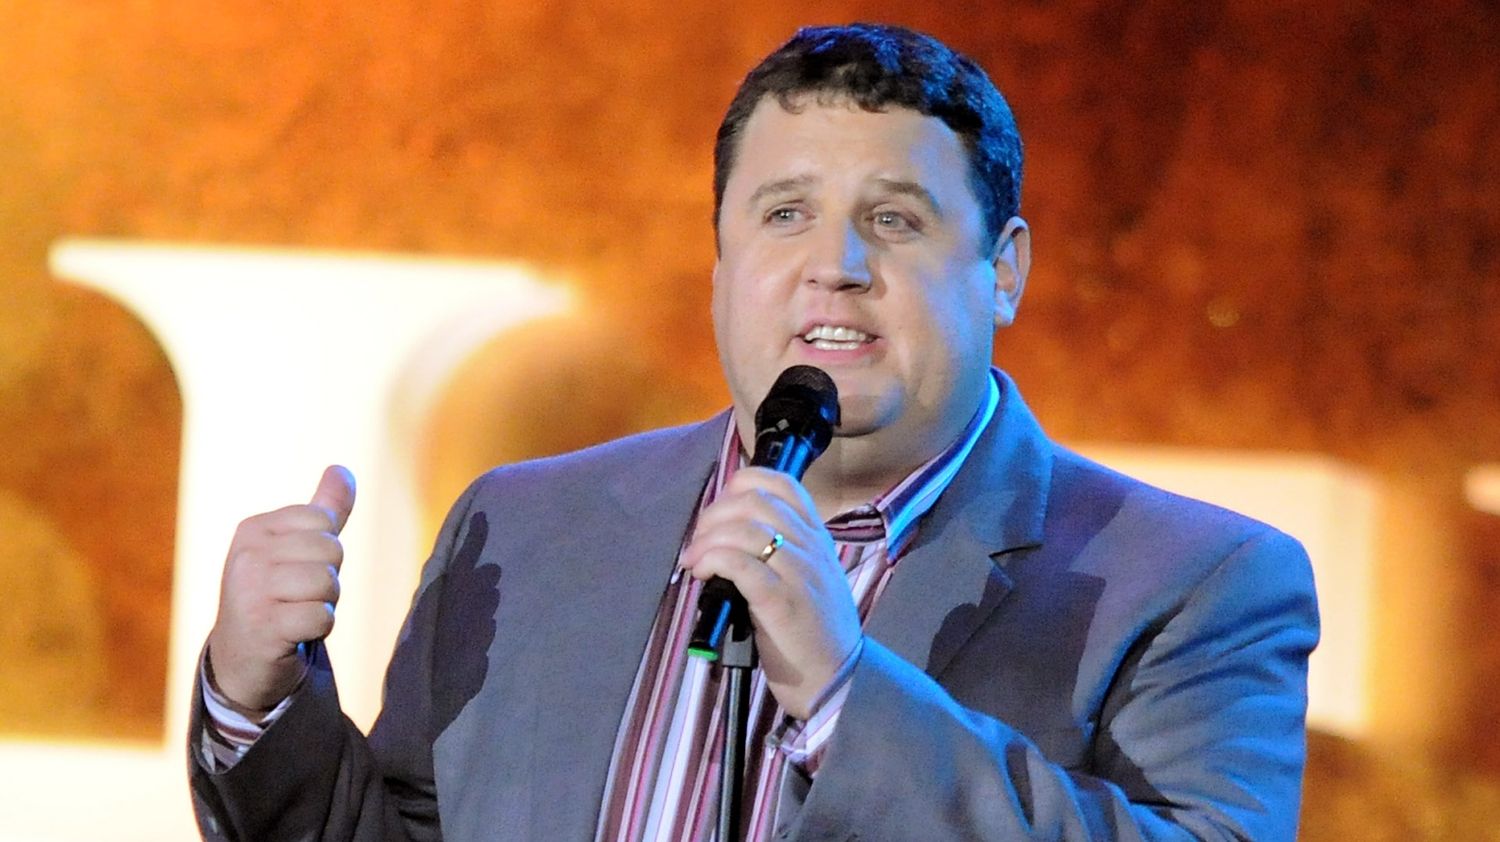 peter kay tour how many tickets can i buy